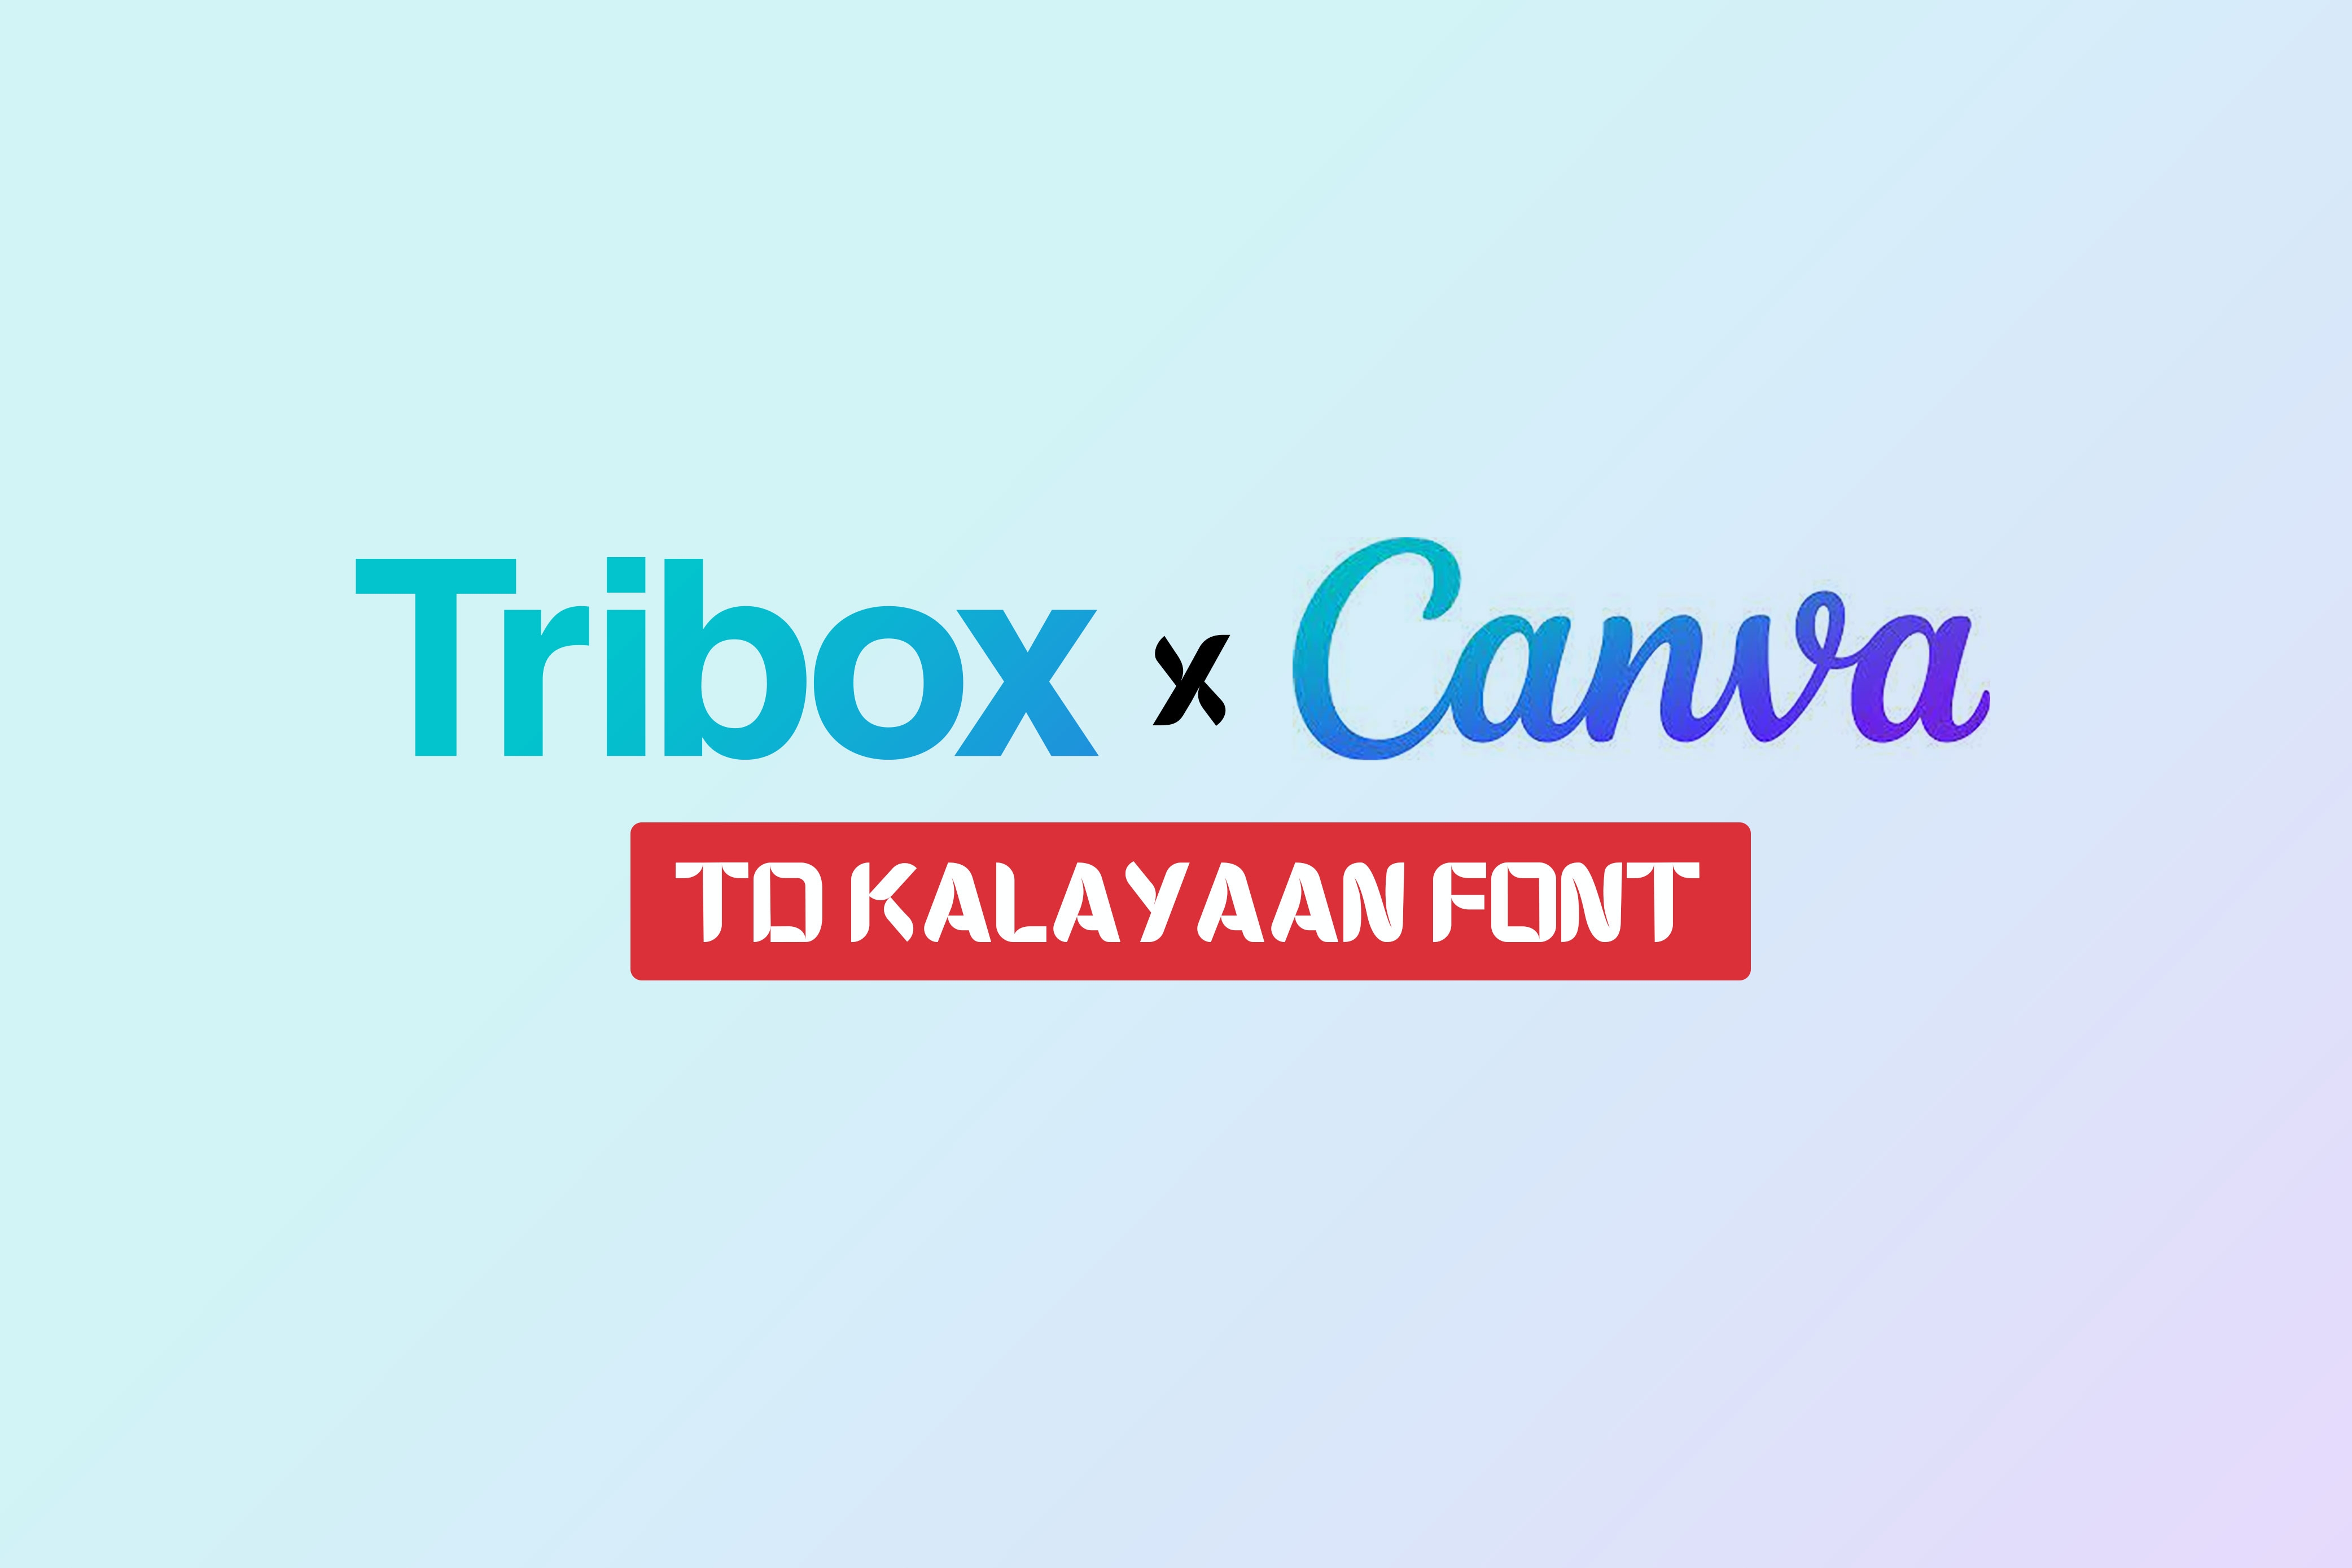 Tribox Design's TD Kalayaan font is now on Canva!